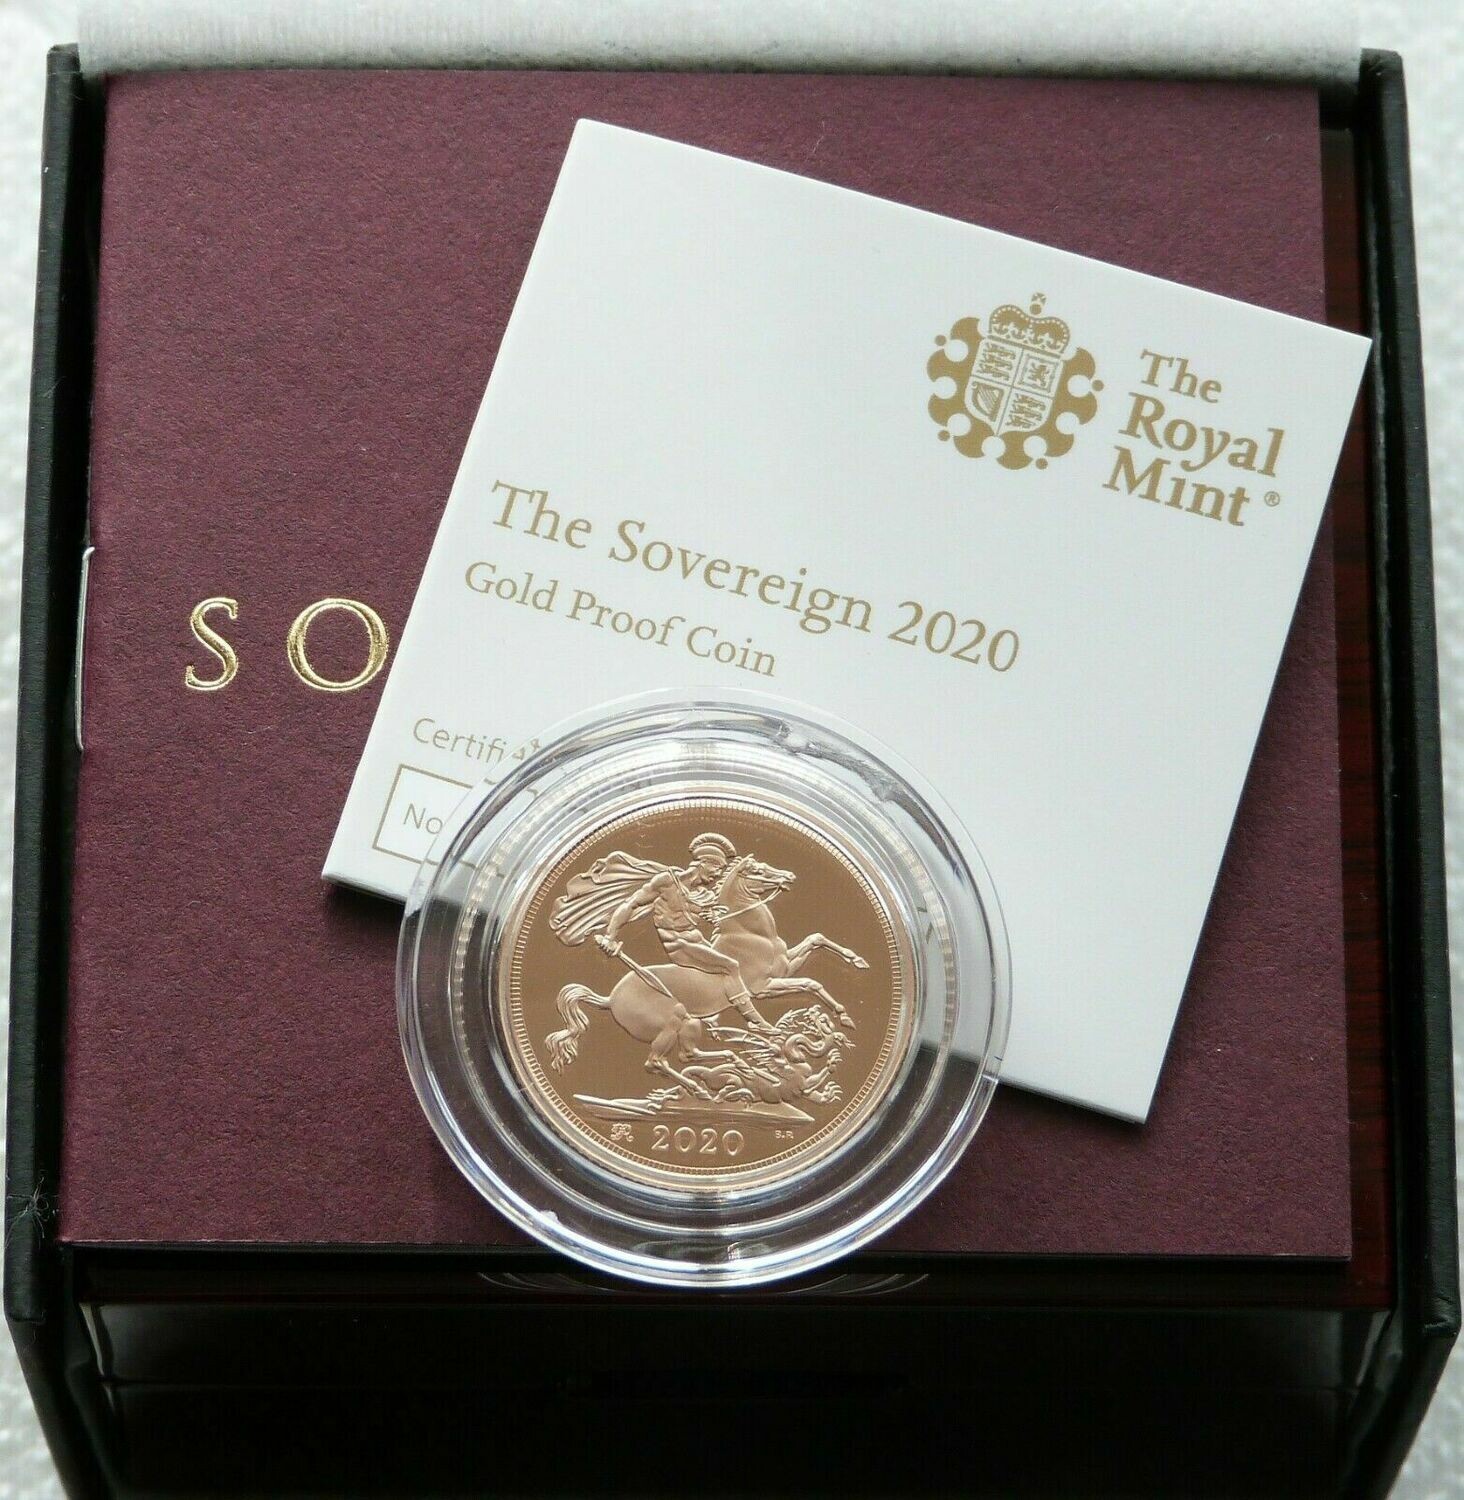 2020 George III Privy Full Sovereign Gold Proof Coin Box Coa